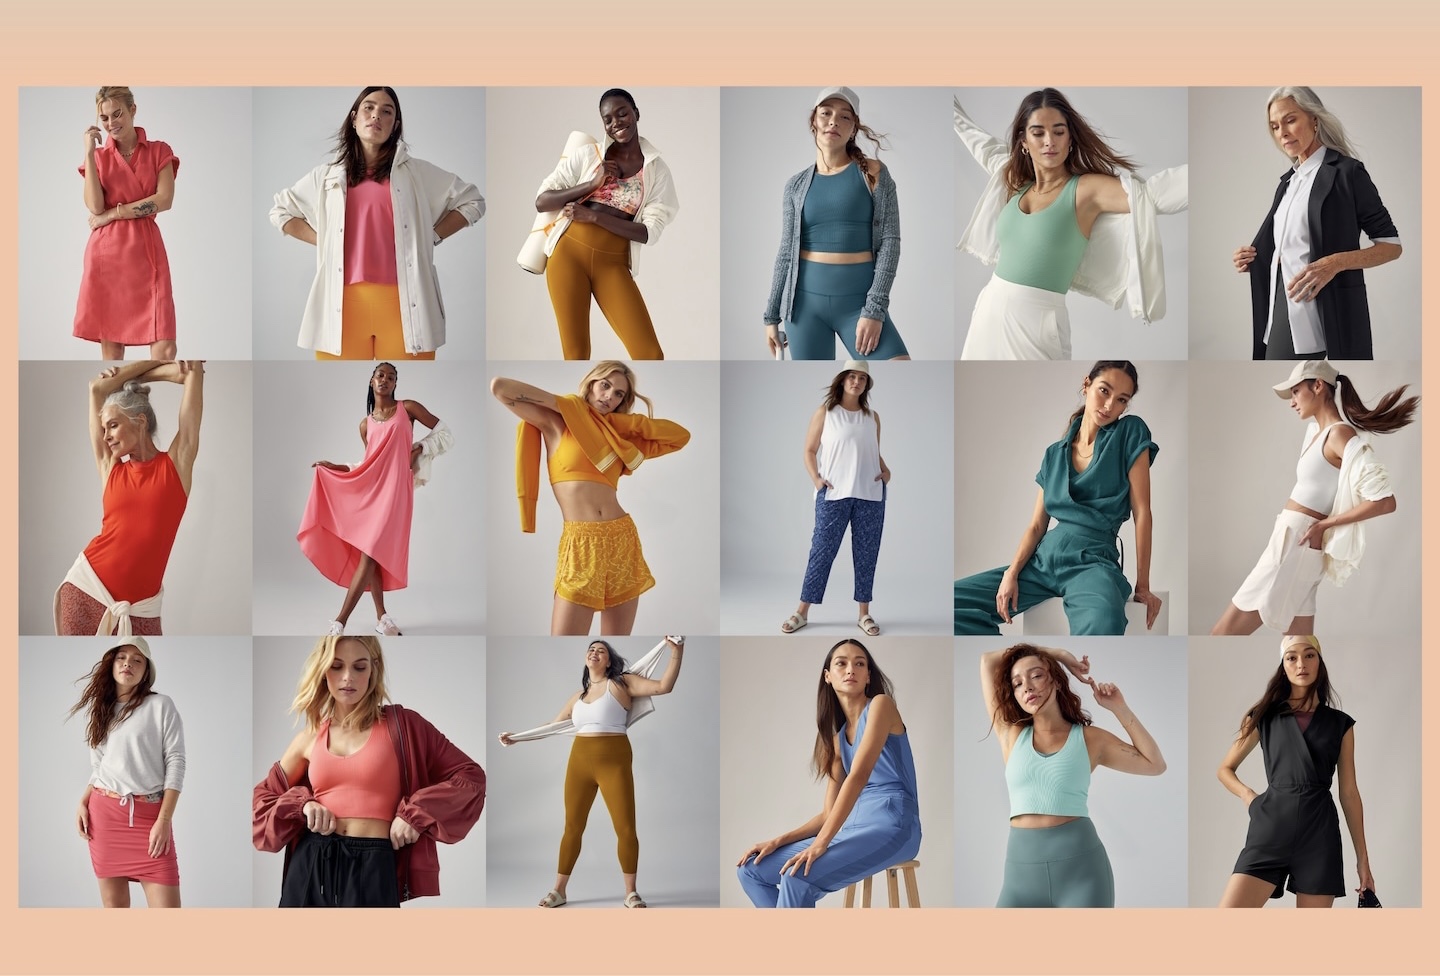 Athleta - At Athleta, our mission is to empower women—near